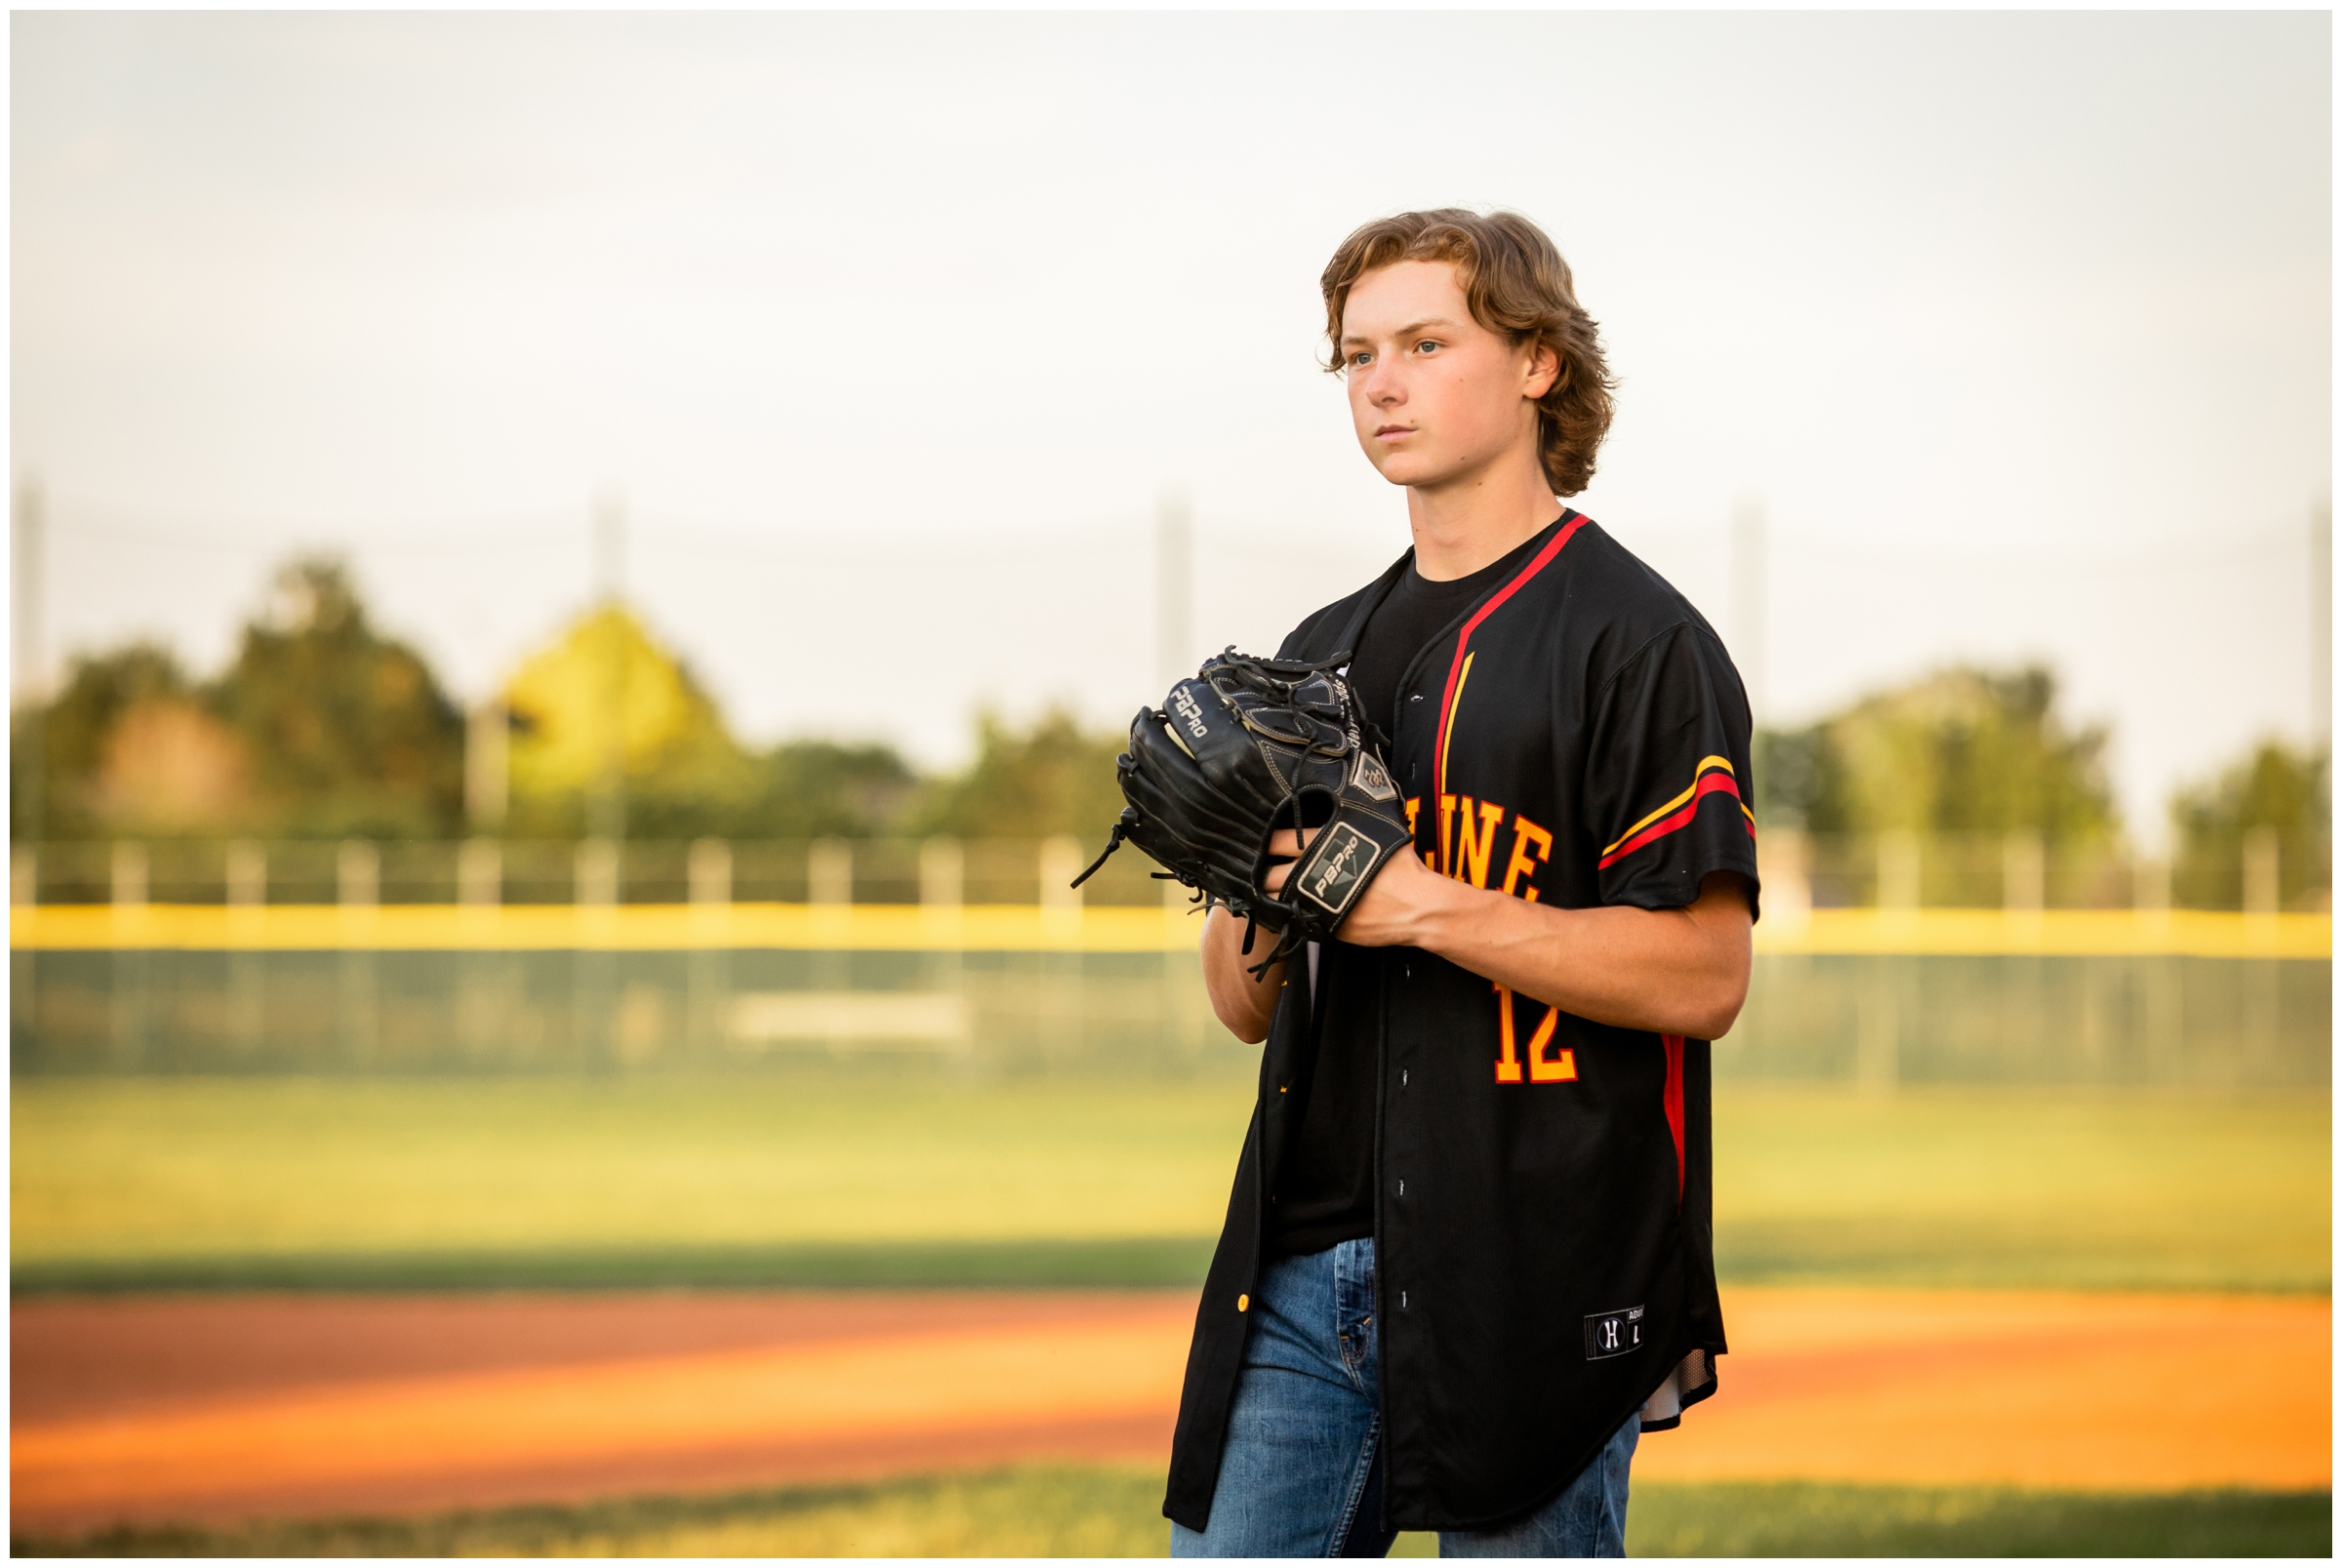 Skyline High School baseball player on pitching mound during Longmont Colorado senior photography session